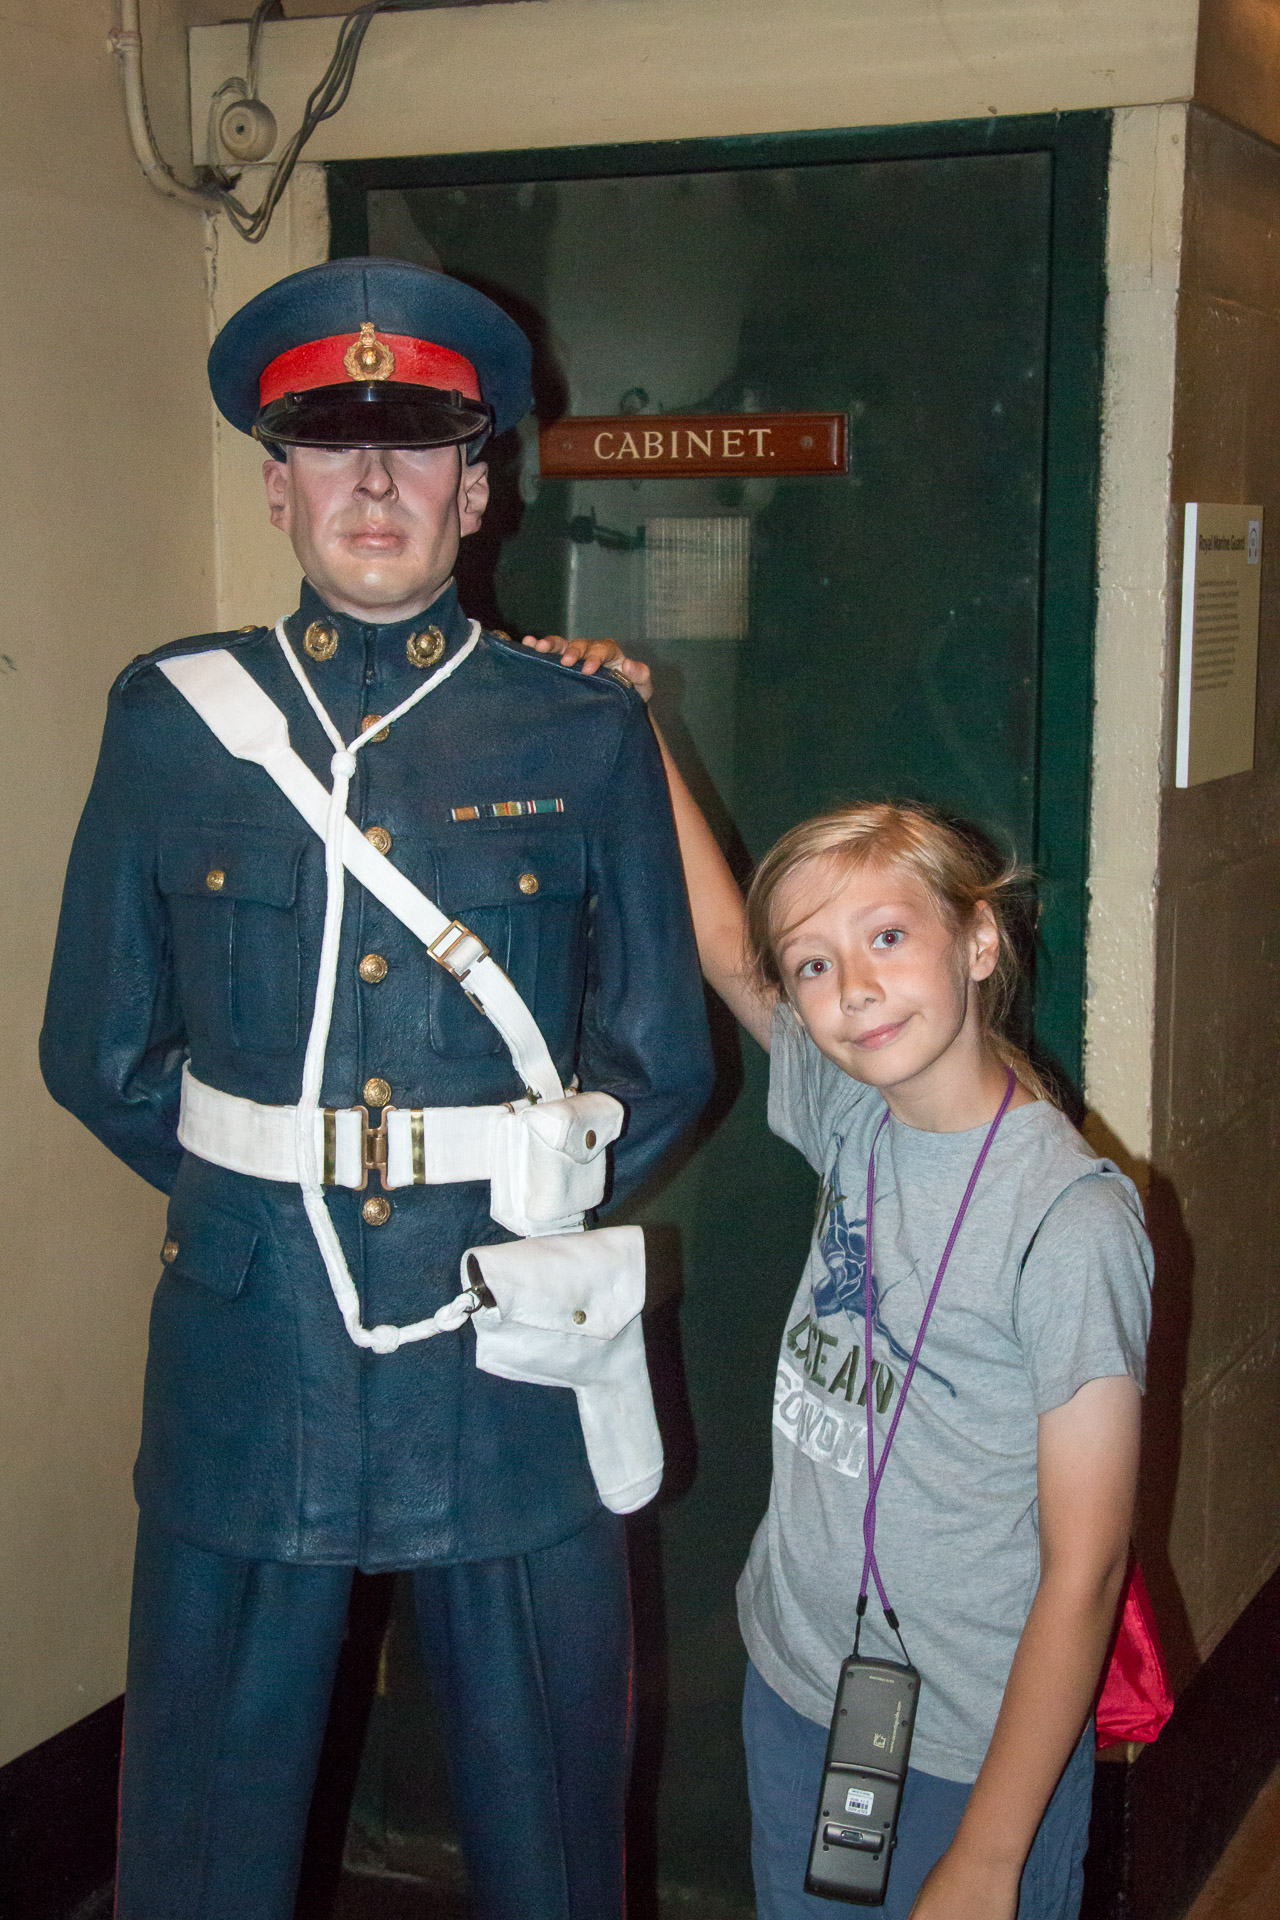 Kyle at the Churchill War Rooms in London